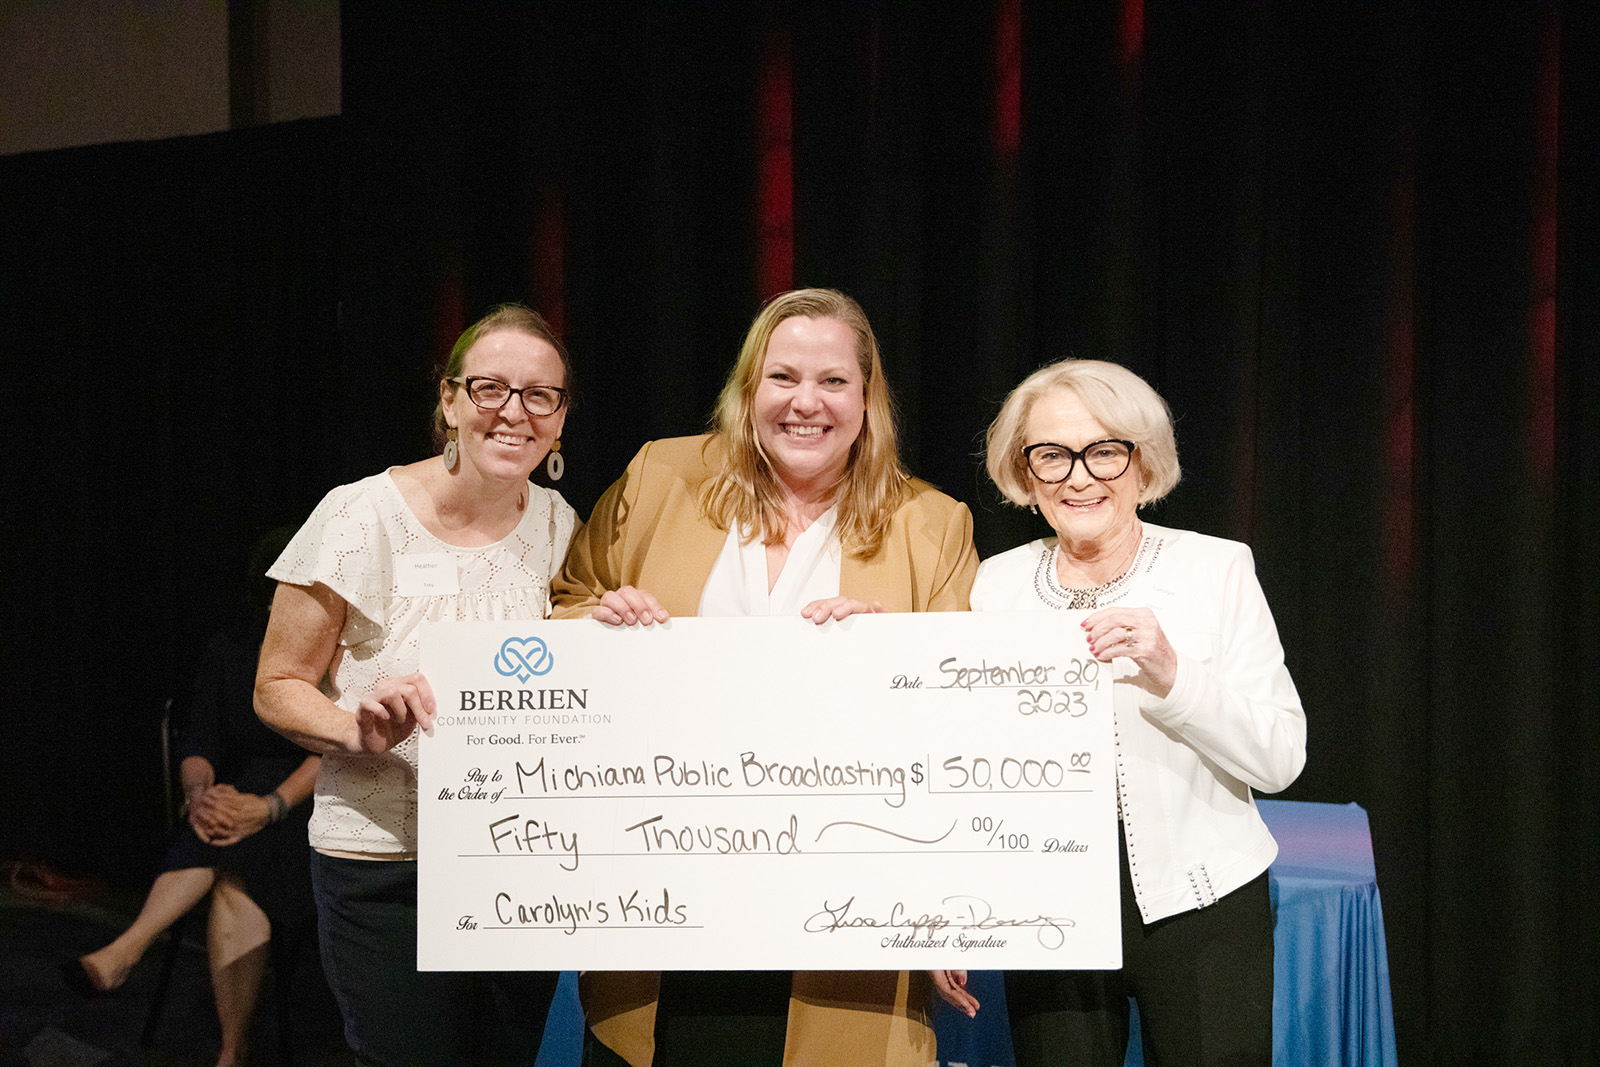 Carolyn Hanson (right) creator of Carolyn’s Kids grant, presents a $50,000 check to Michiana Public Broadcasting’s Heather Frey (left) and Amanda Miller Kelley (center) September 20 at Berrien Community Foundation's Annual Meeting & Celebration. was selected as a Michiana Public Broadcasting Carolyn’s Kids grant winner.